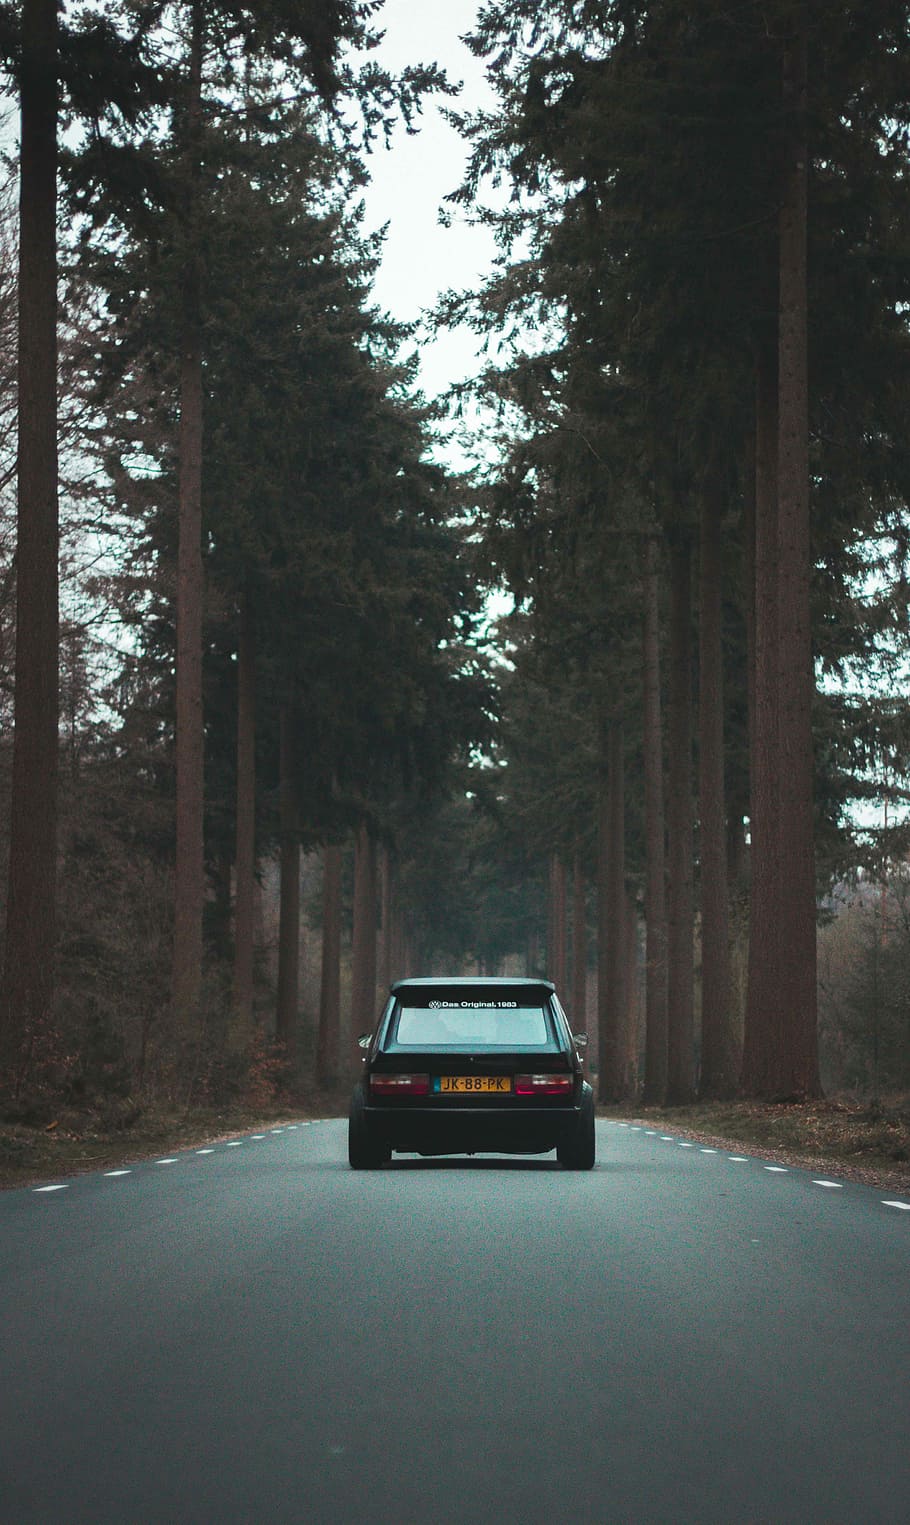 black 5-door hatchback driving in middle of road surrounded by trees during daytime, black car on road between trees during day